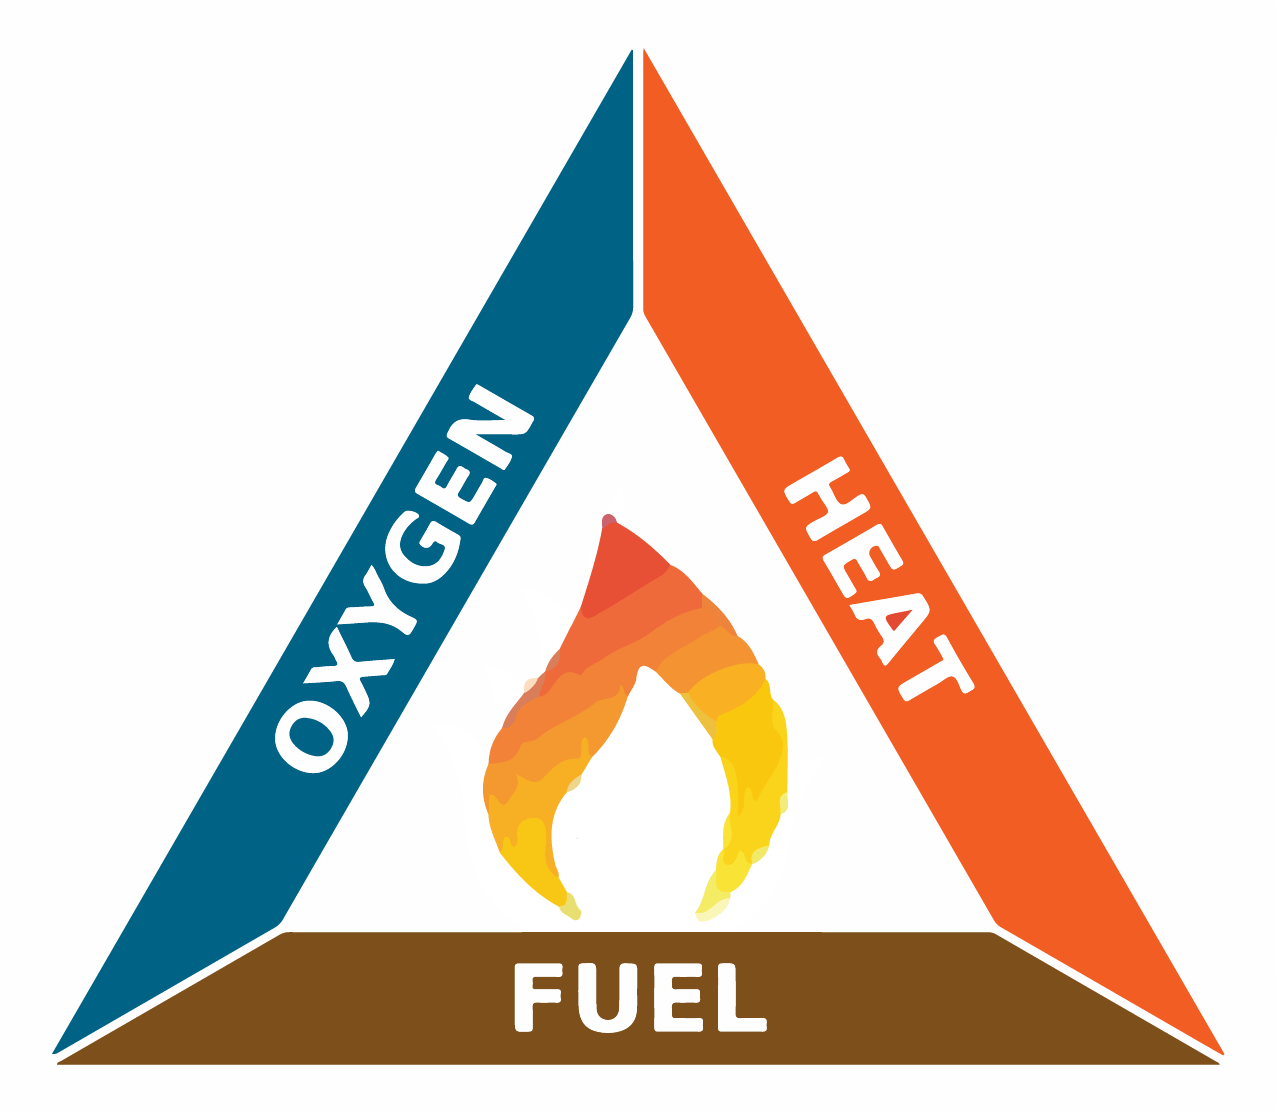 oxygen, heat and fuel in triangle